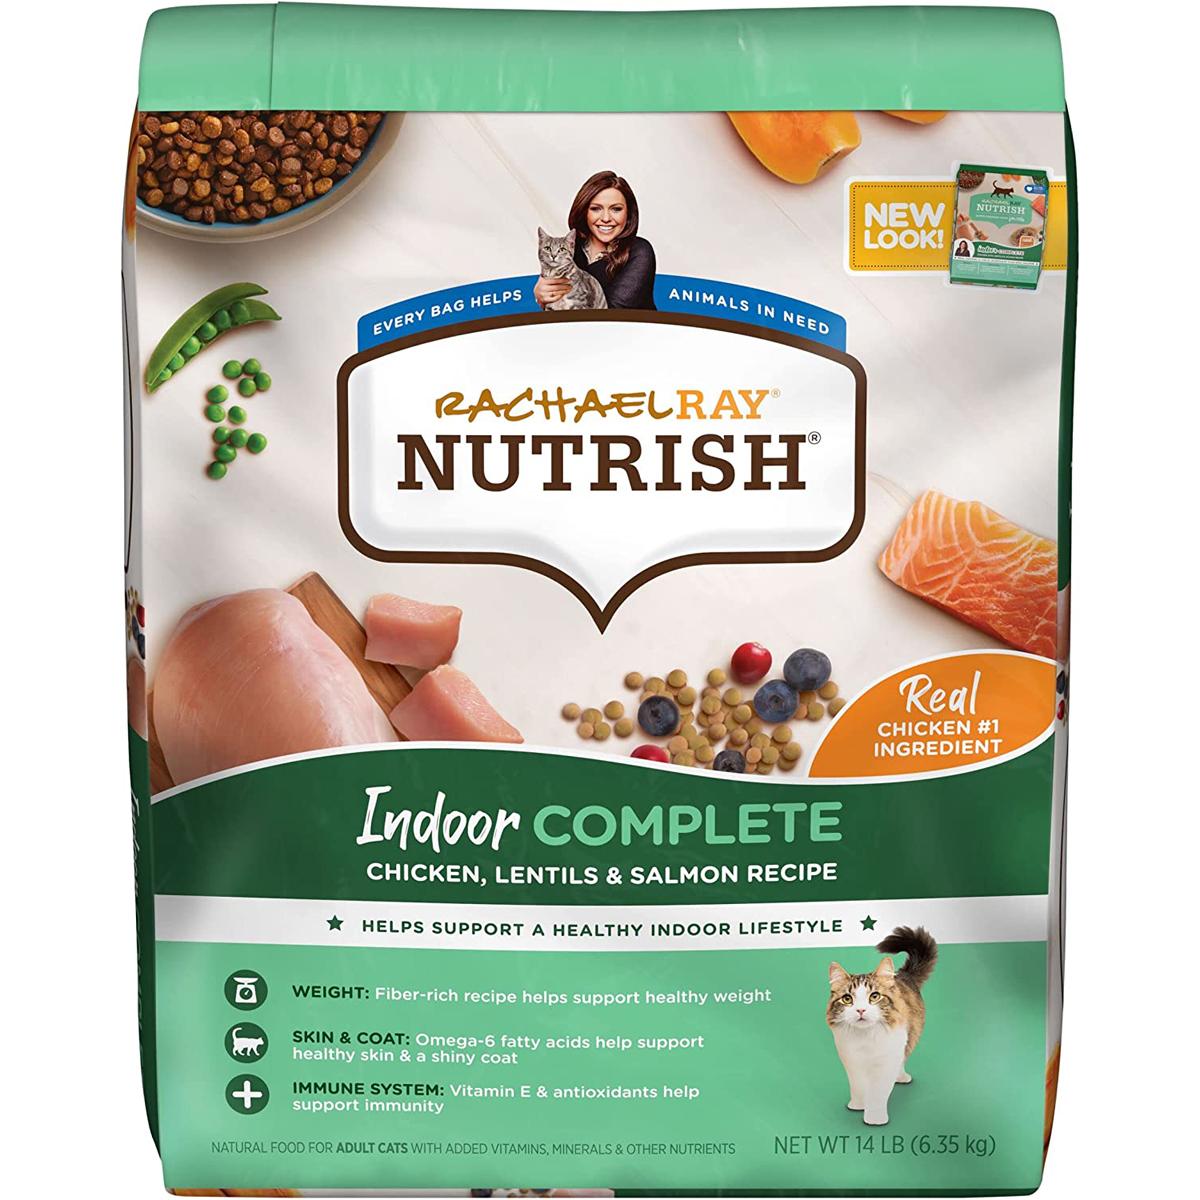 Rachael Ray Nutrish Indoor Complete Dry Cat Food for $12.82 Shipped